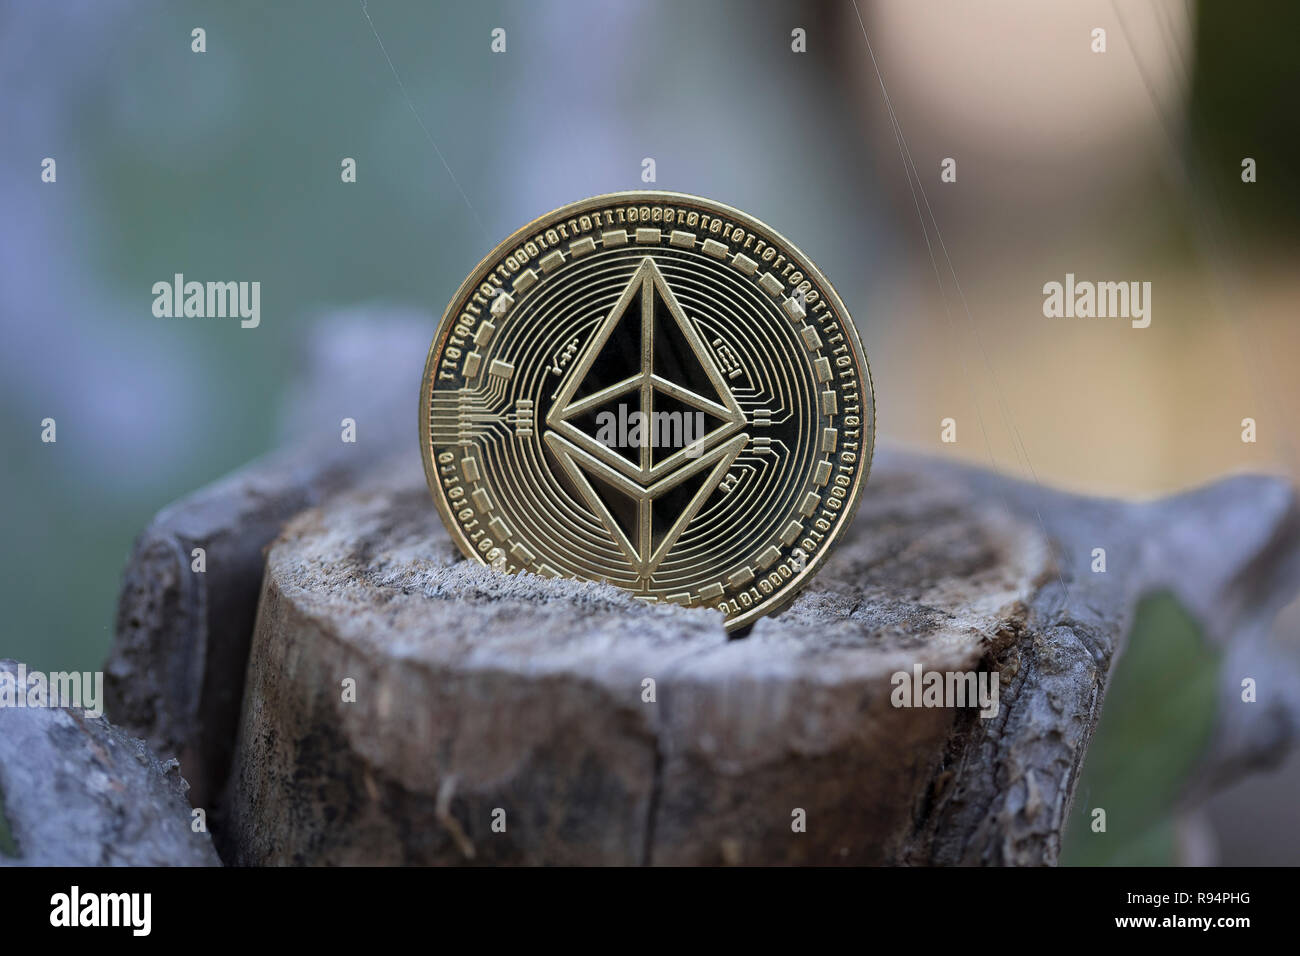 Ethereum classic physical coin placed on cut tree Stock Photo